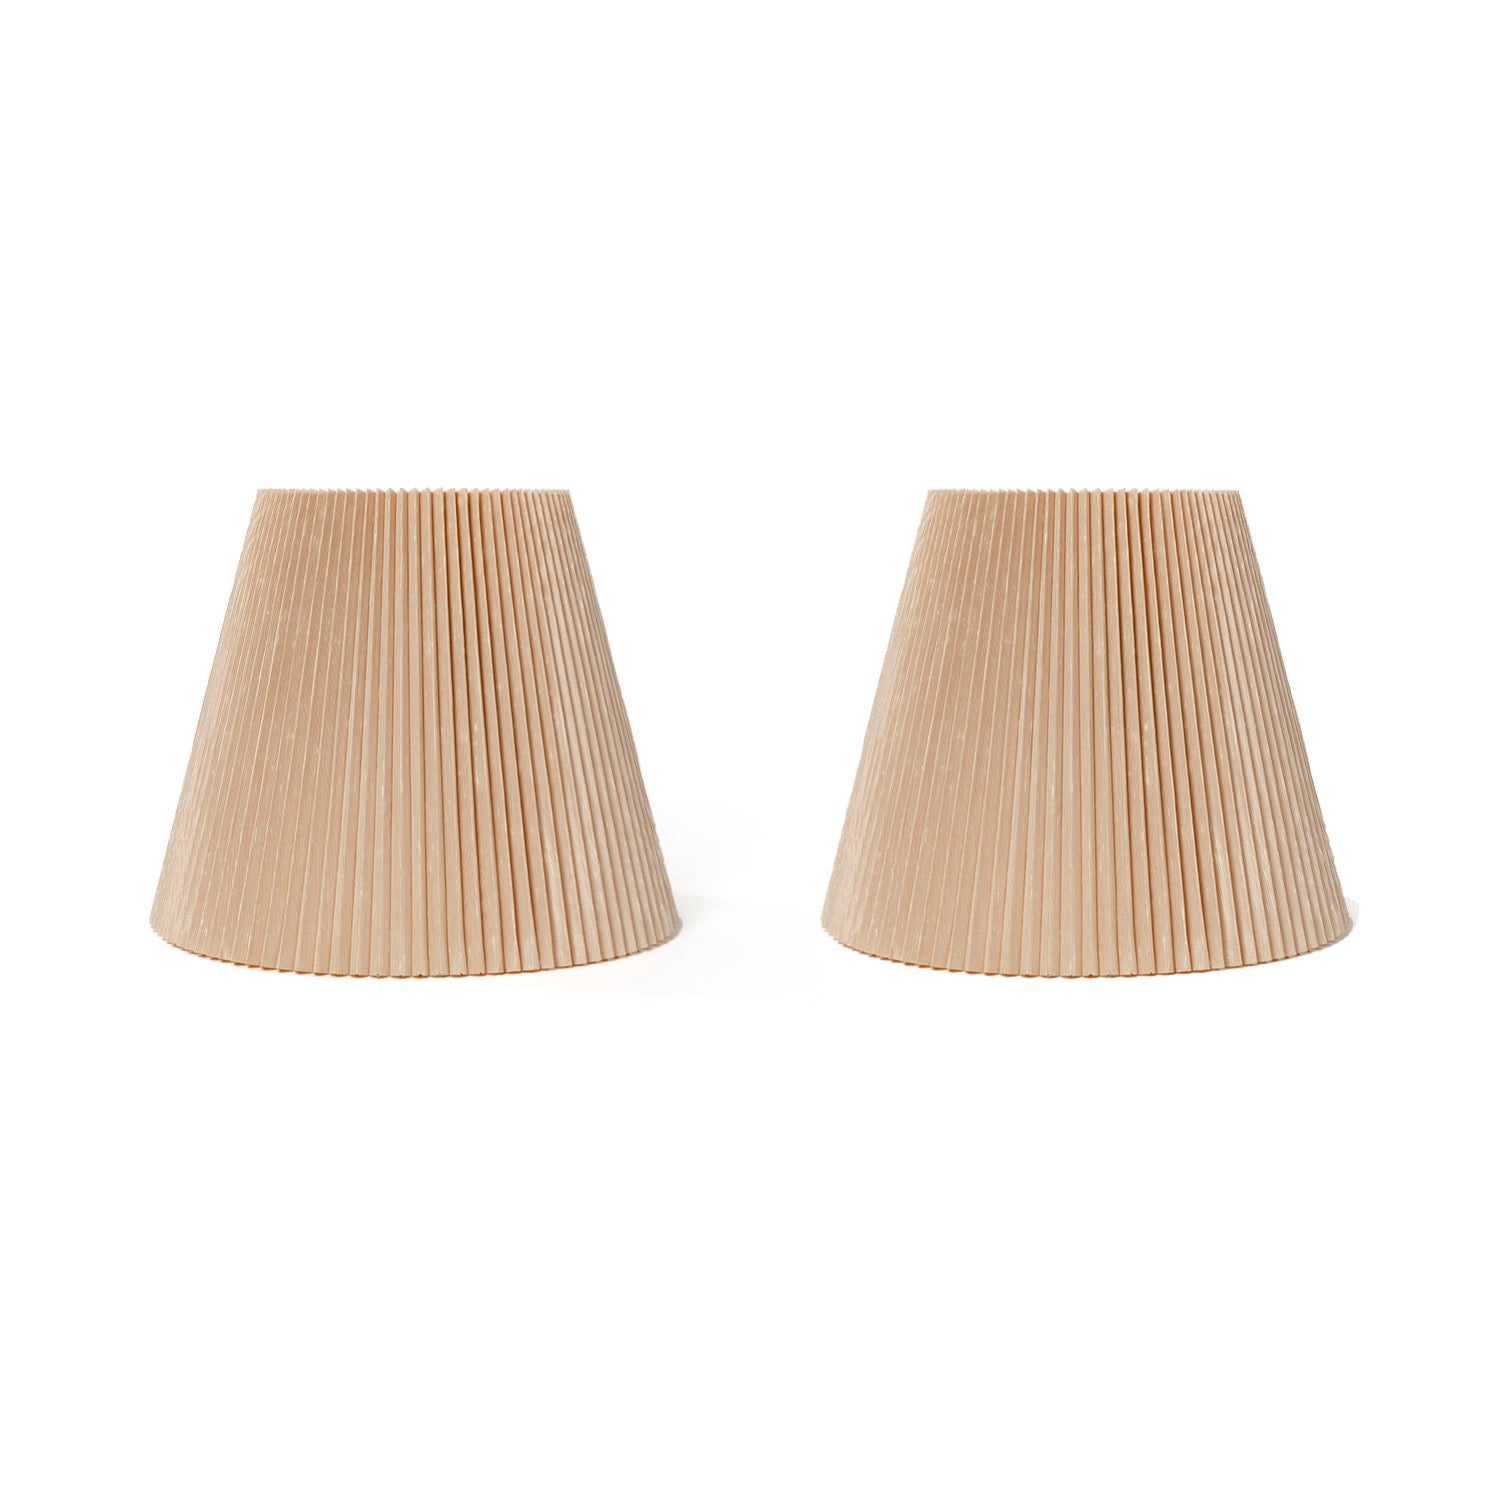 Pleated Lamp Shades from USA